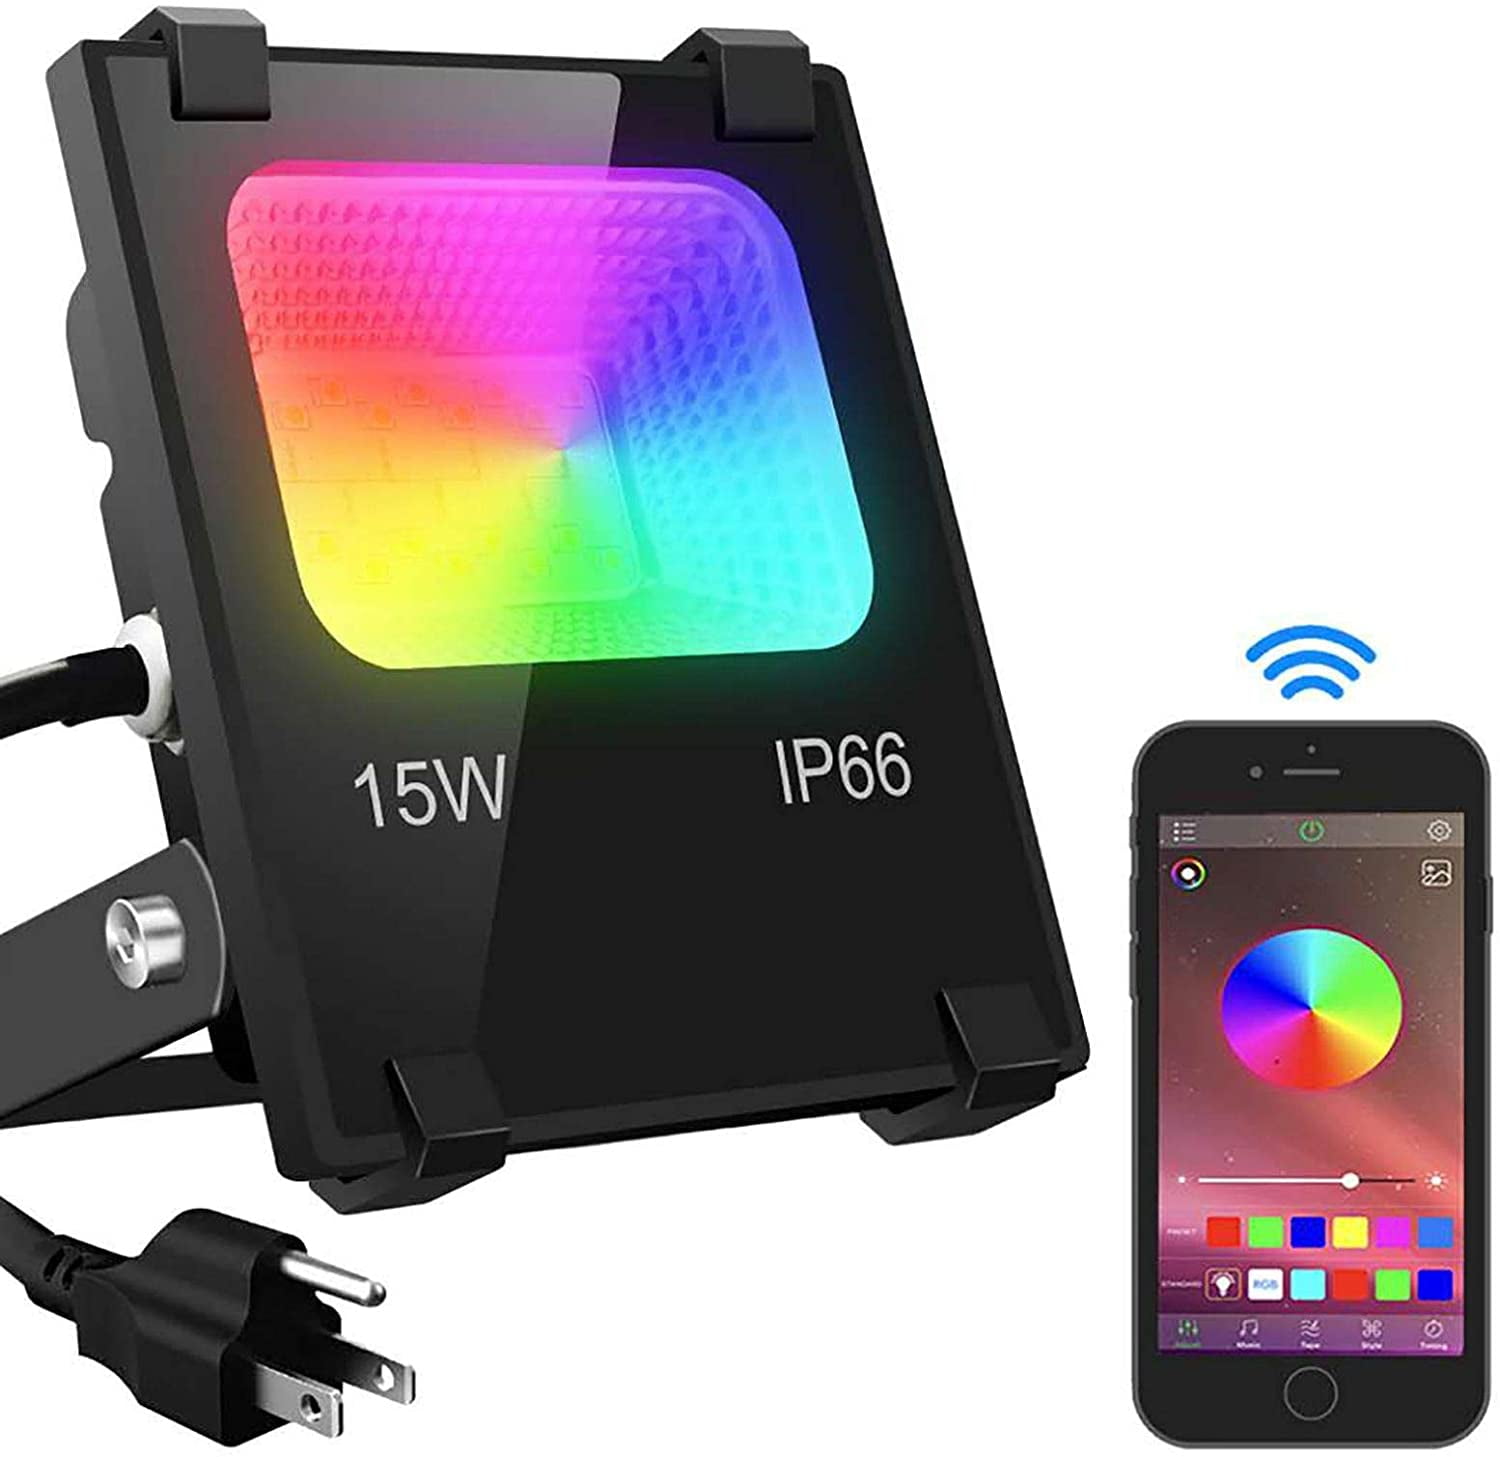 Grouping Bluetooth Smart Floodlights RGBW 2700K Warm White & 16 Million Colors Timing 2 Pack LED Flood Light Outdoor 20 Modes IP66 Waterproof 15W RGB Color Changing Controlled by Phone 